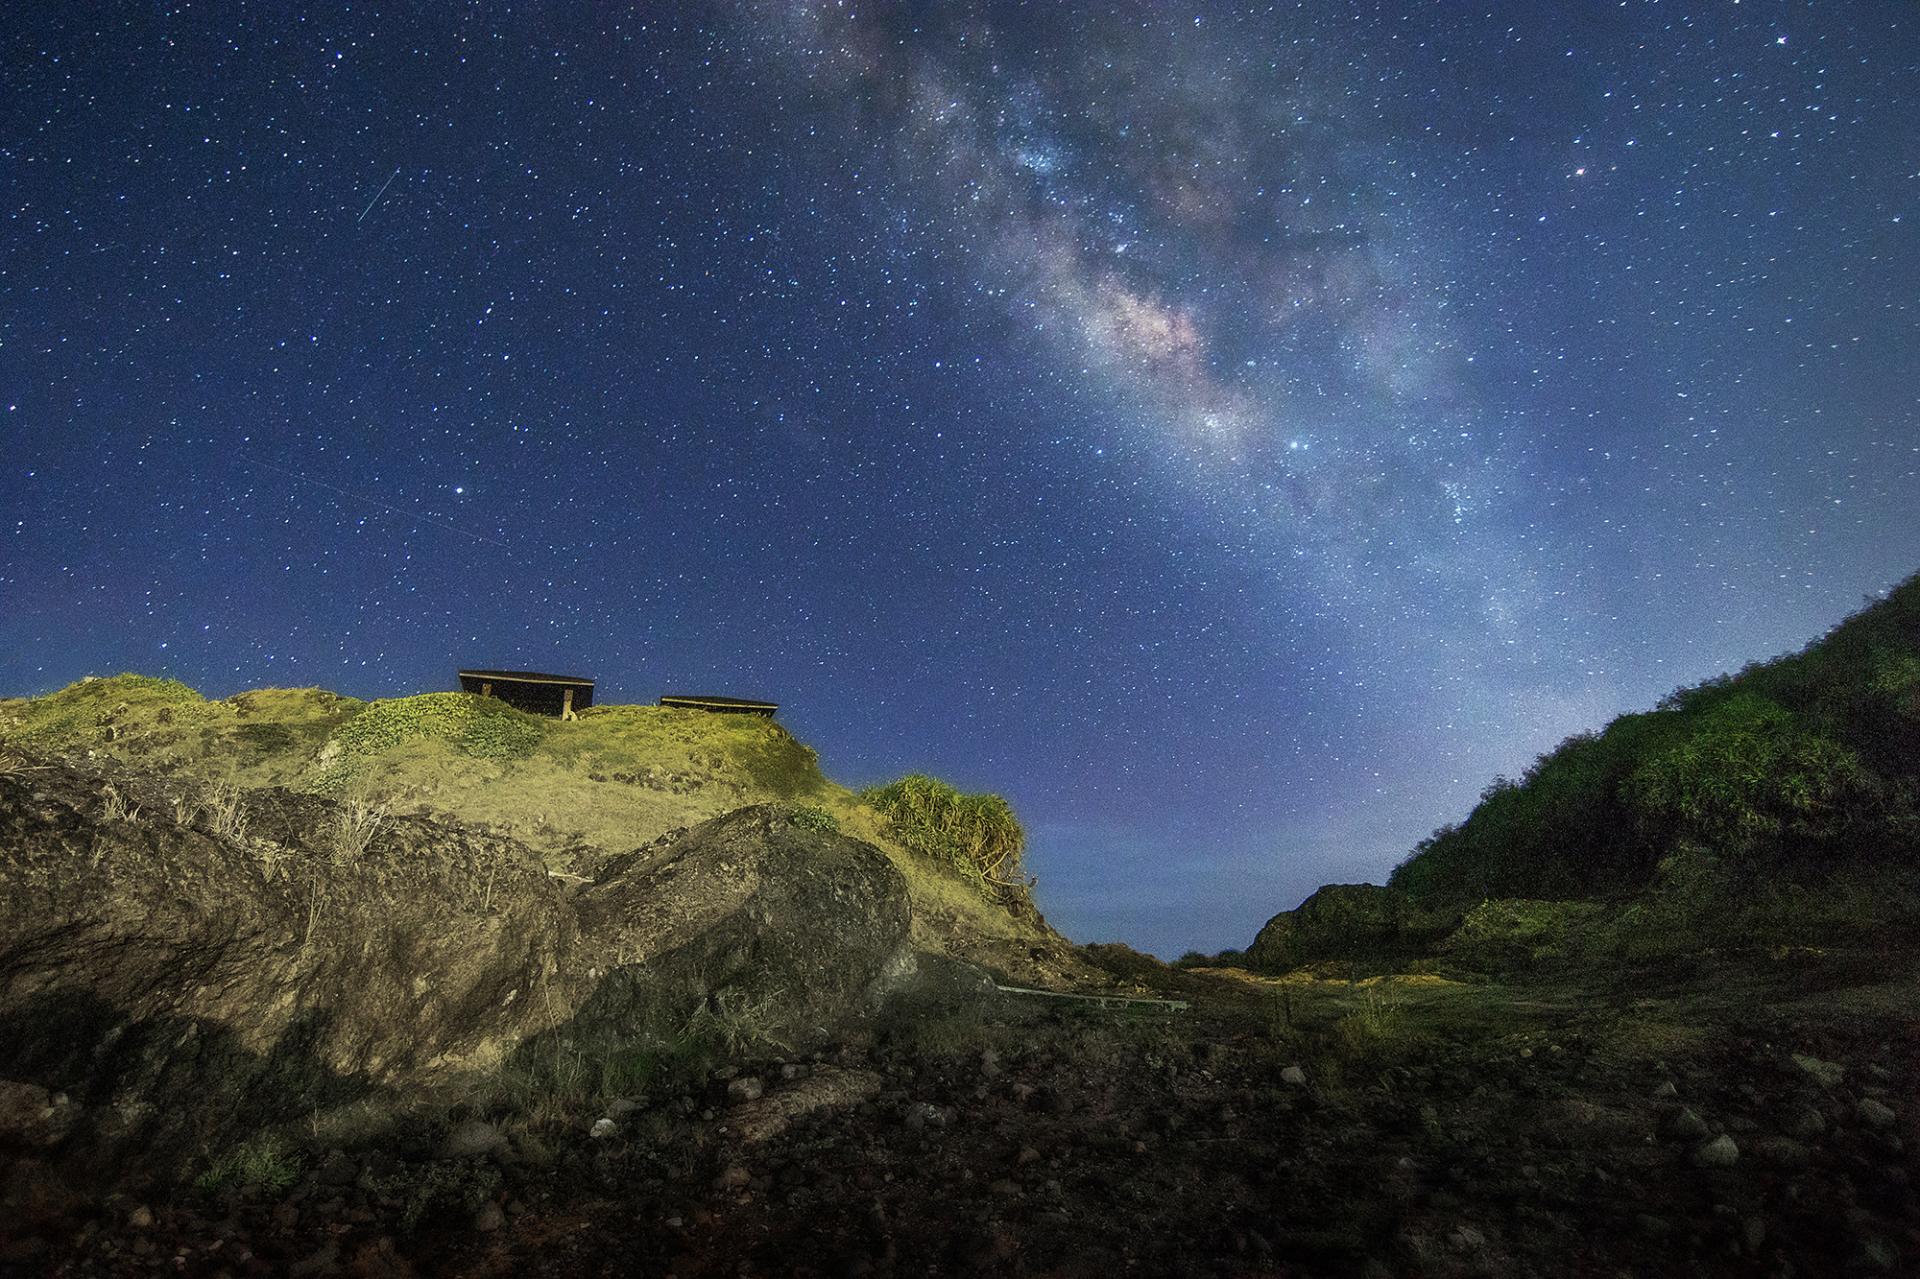 New York Photography Awards Winner - The Milky Way , Our House